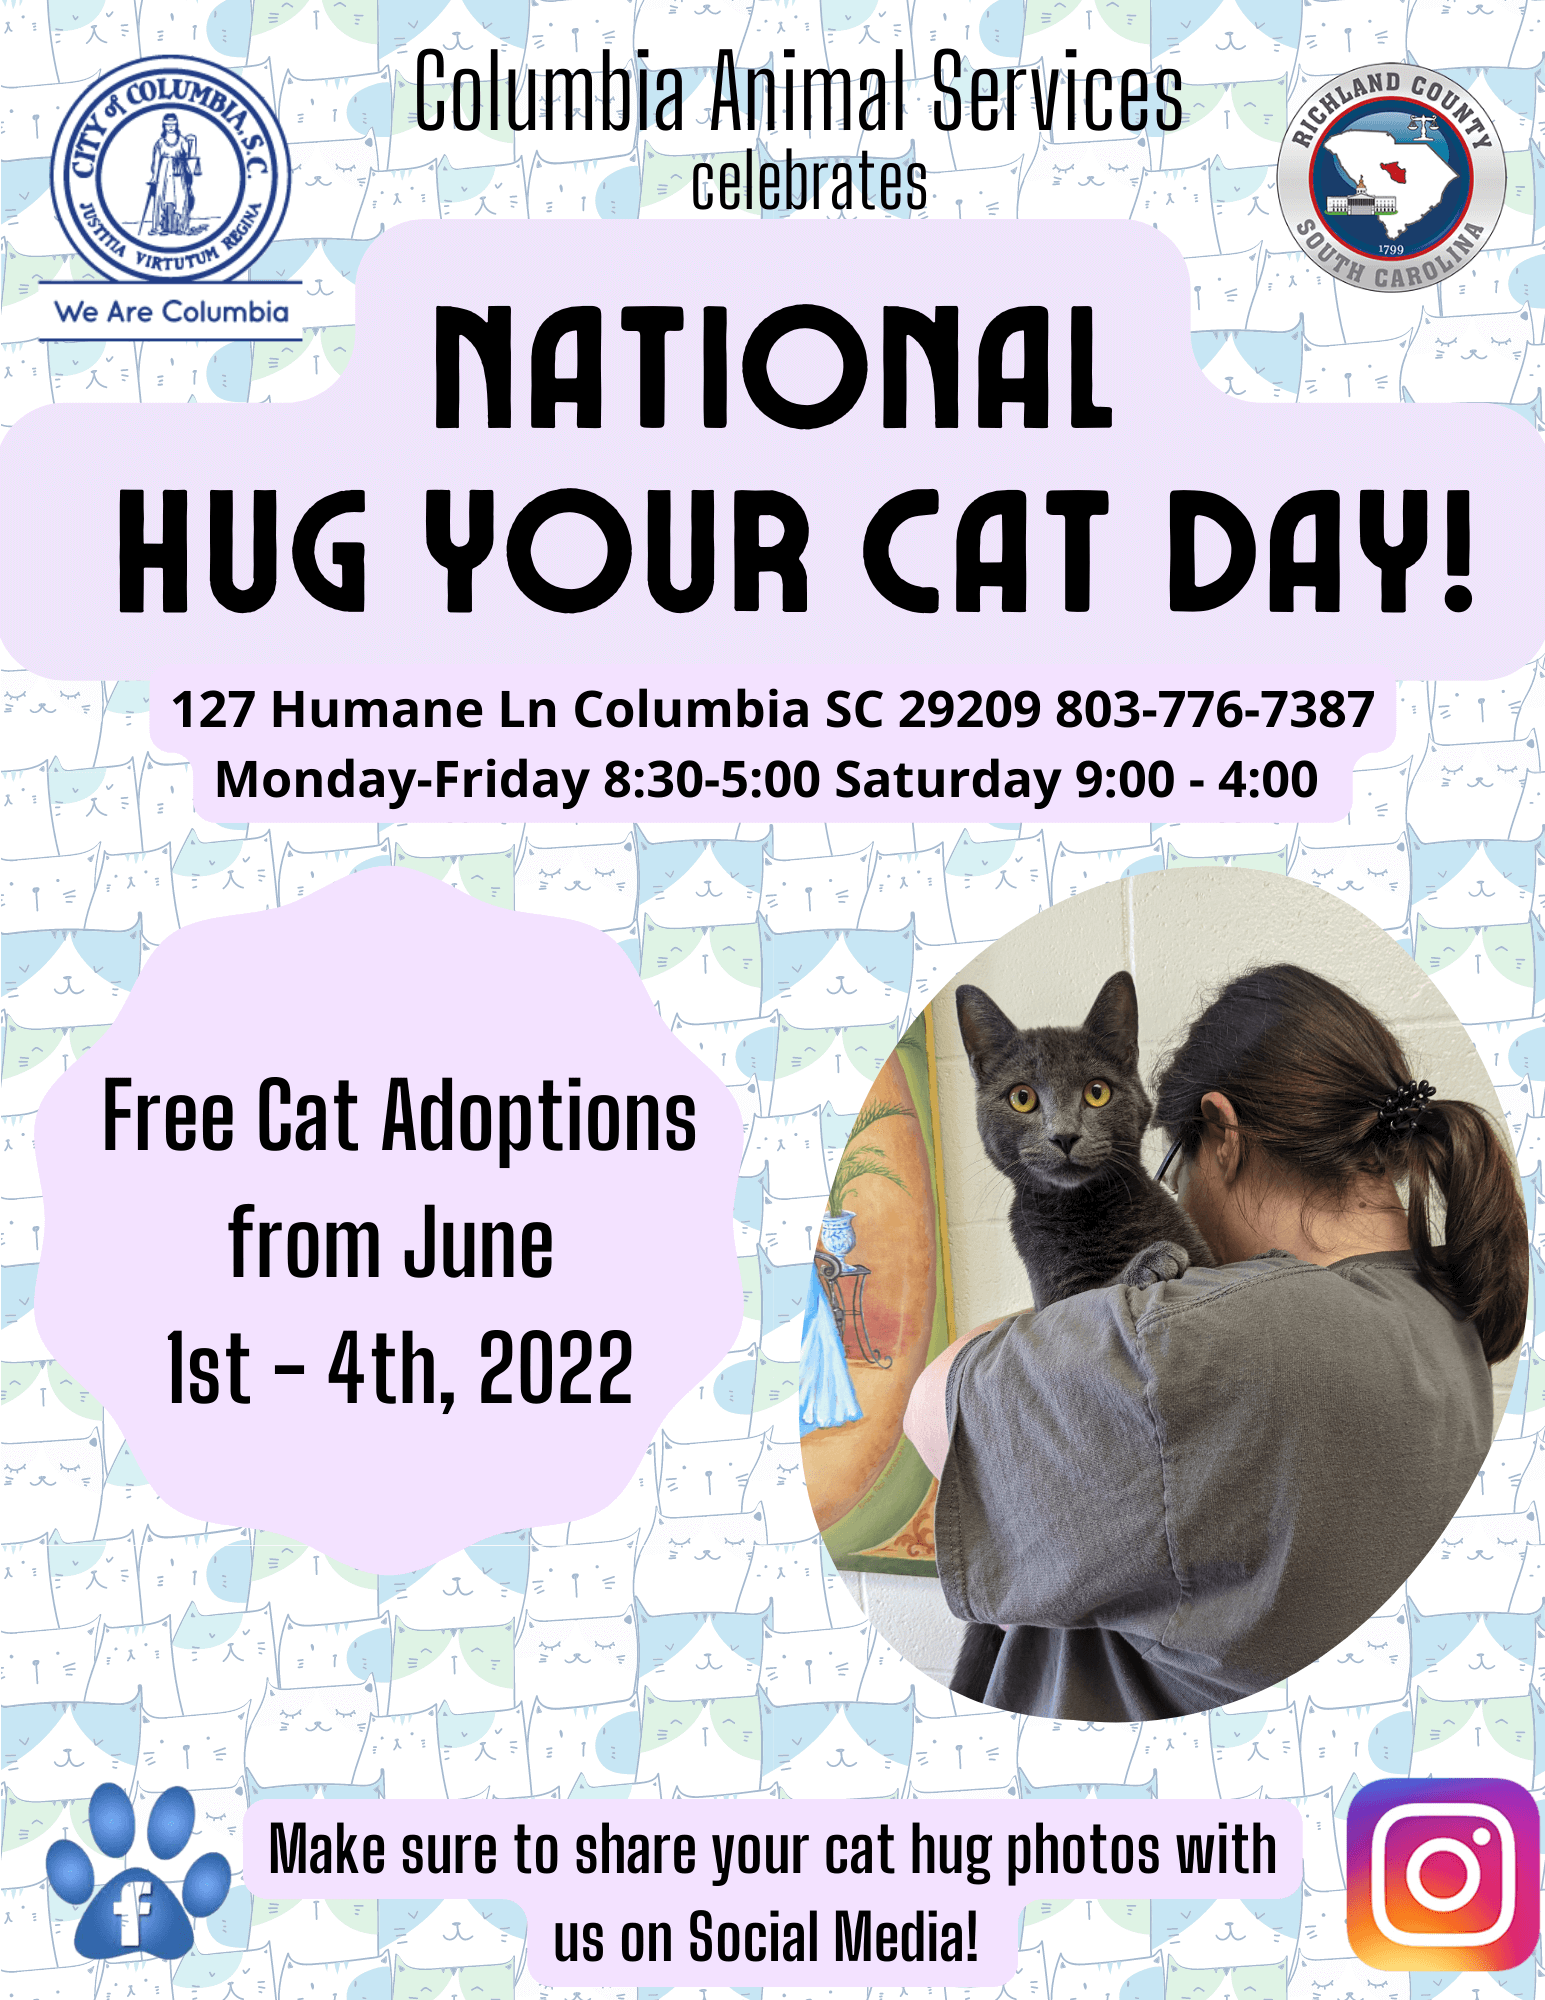 Free Cat Adoptions for National Hug Your Cat Day City of Columbia